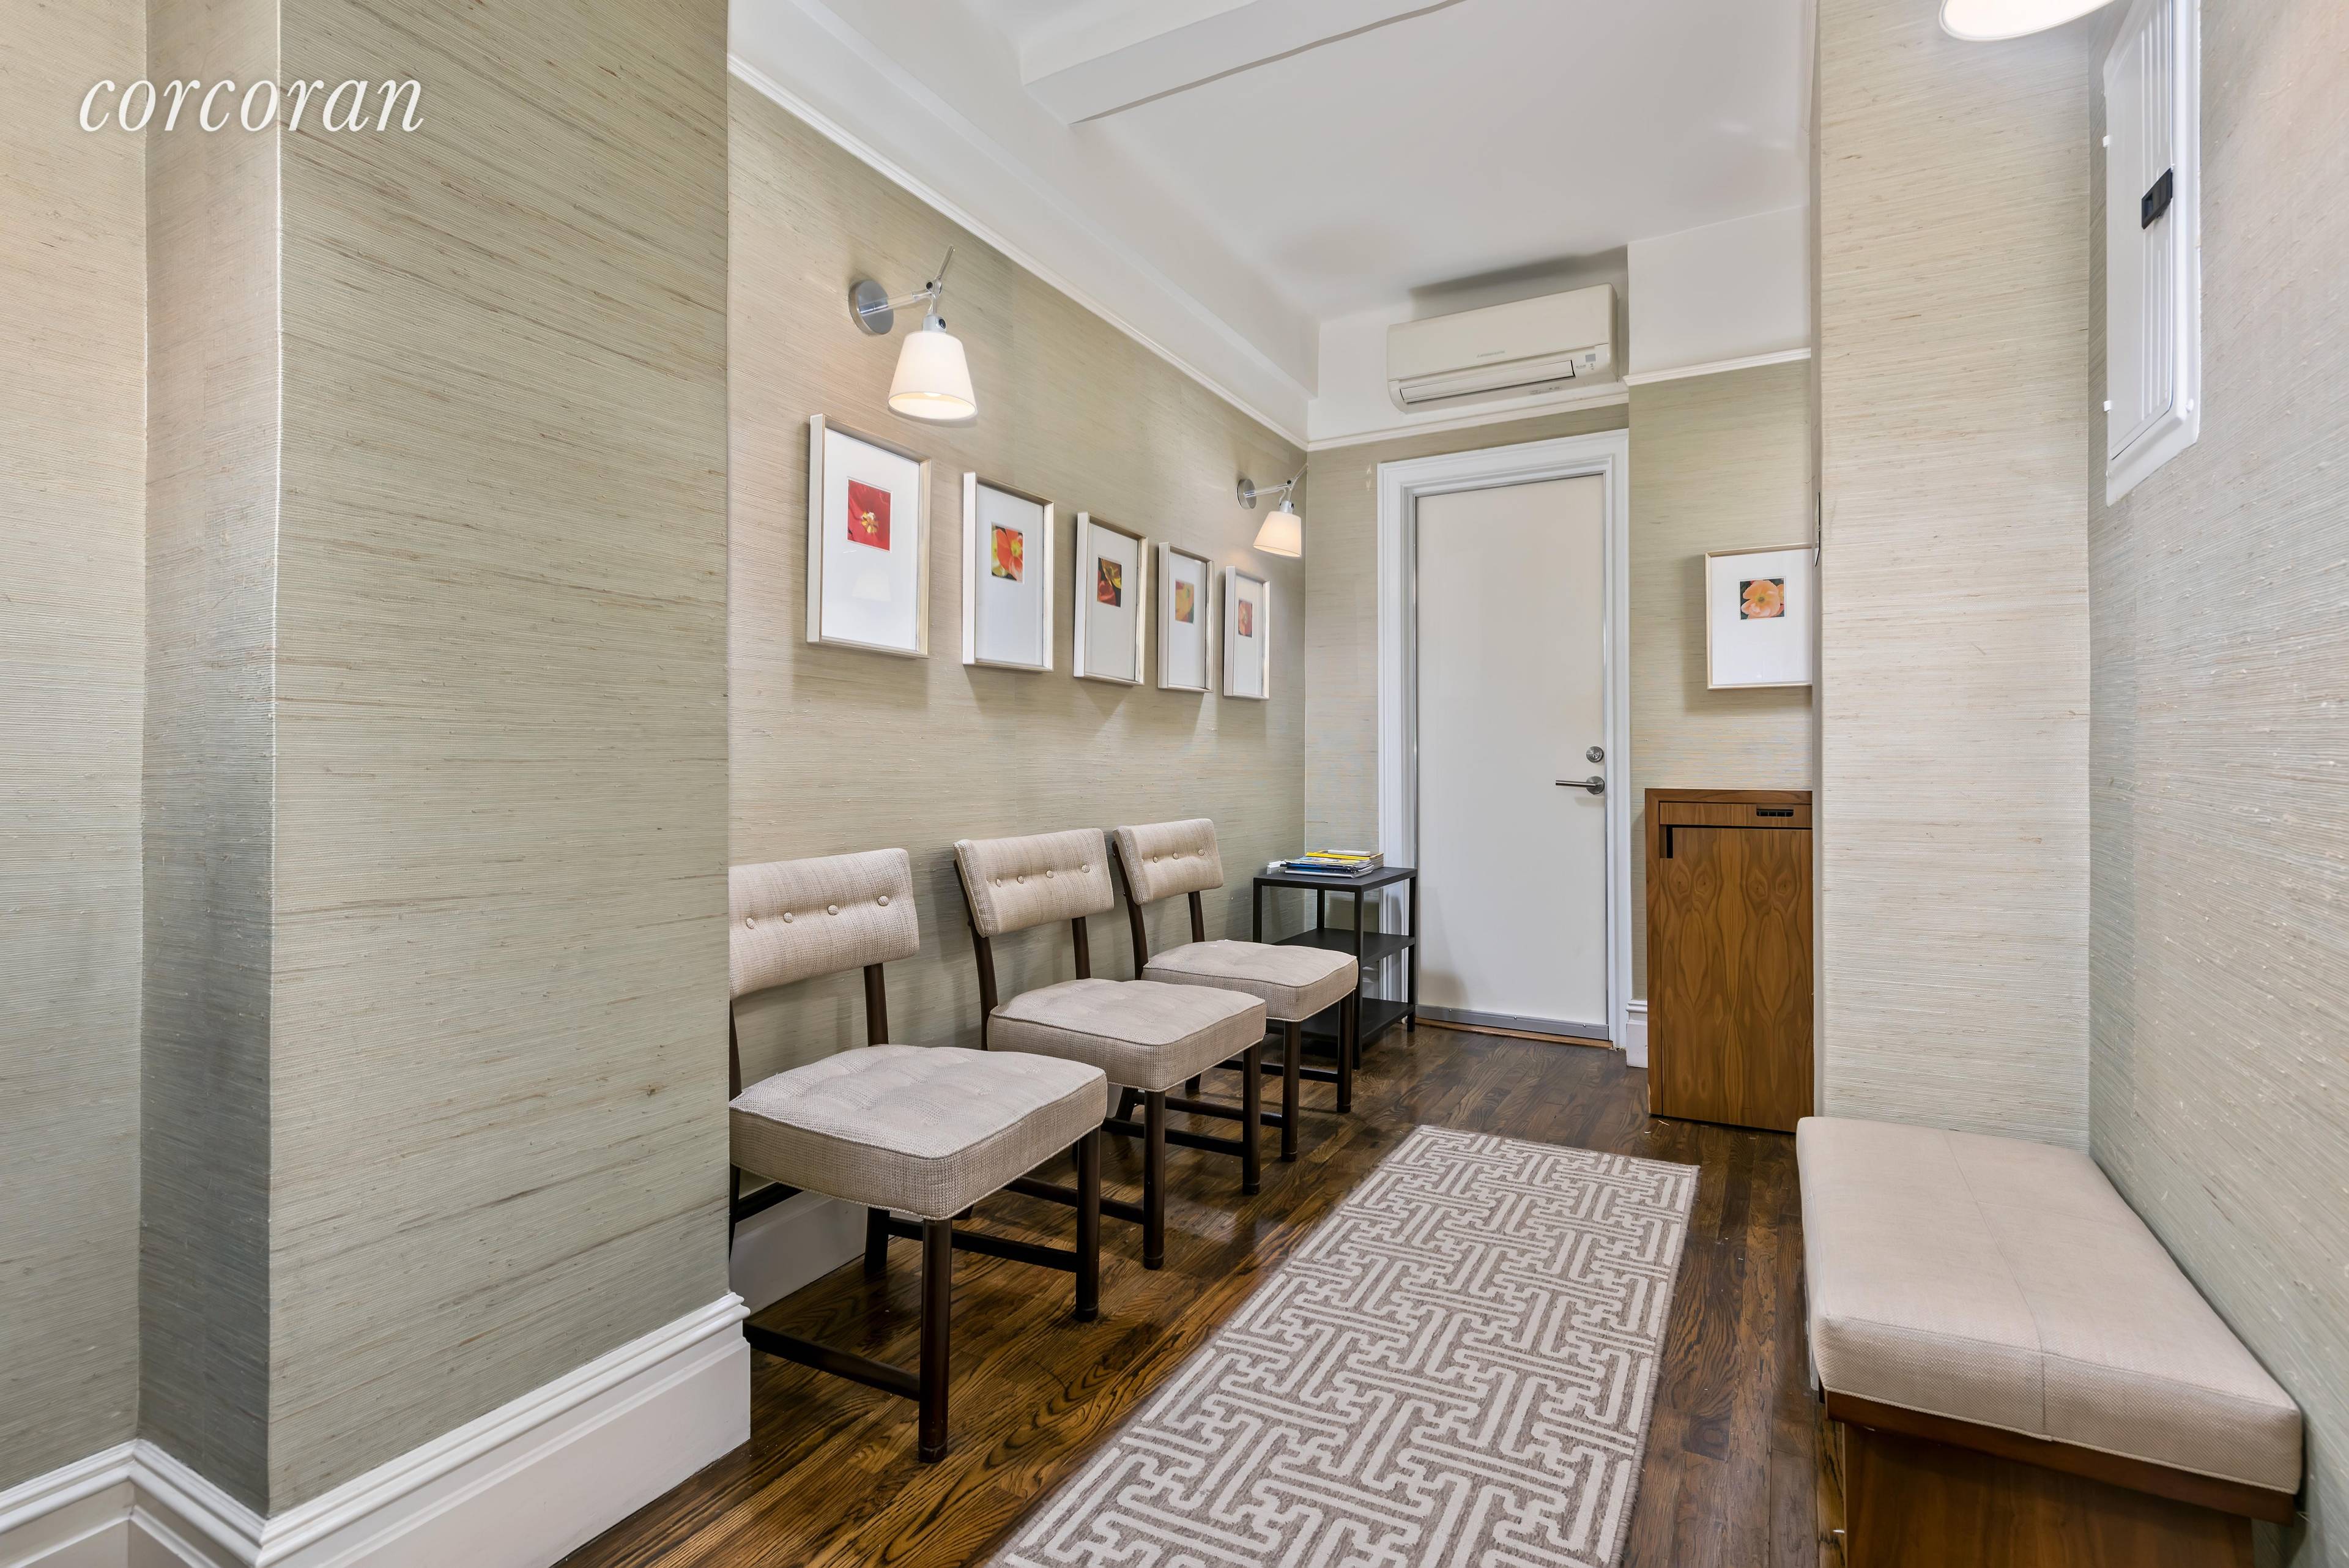 Pristine medical cooperative featuring three spacious consultation rooms, a waiting area, and a full bathroom featuring high end fittings and a large shower stall.